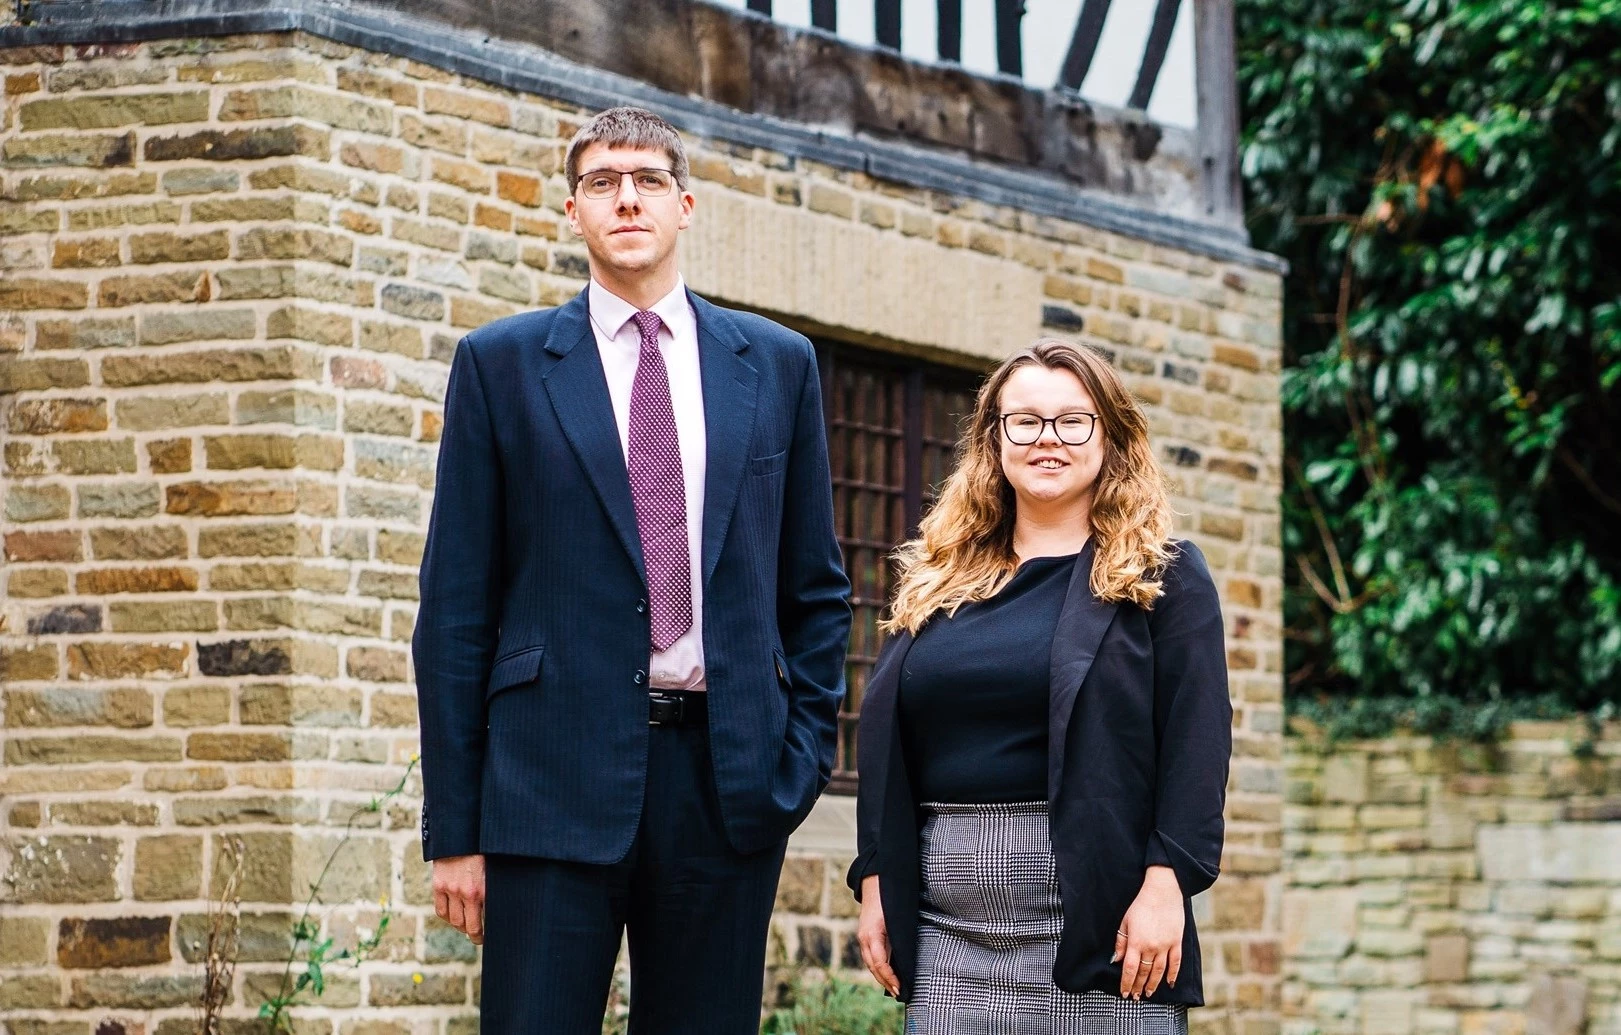  James Burdekin and Natalie Gibson at Sheffield's MD Law.